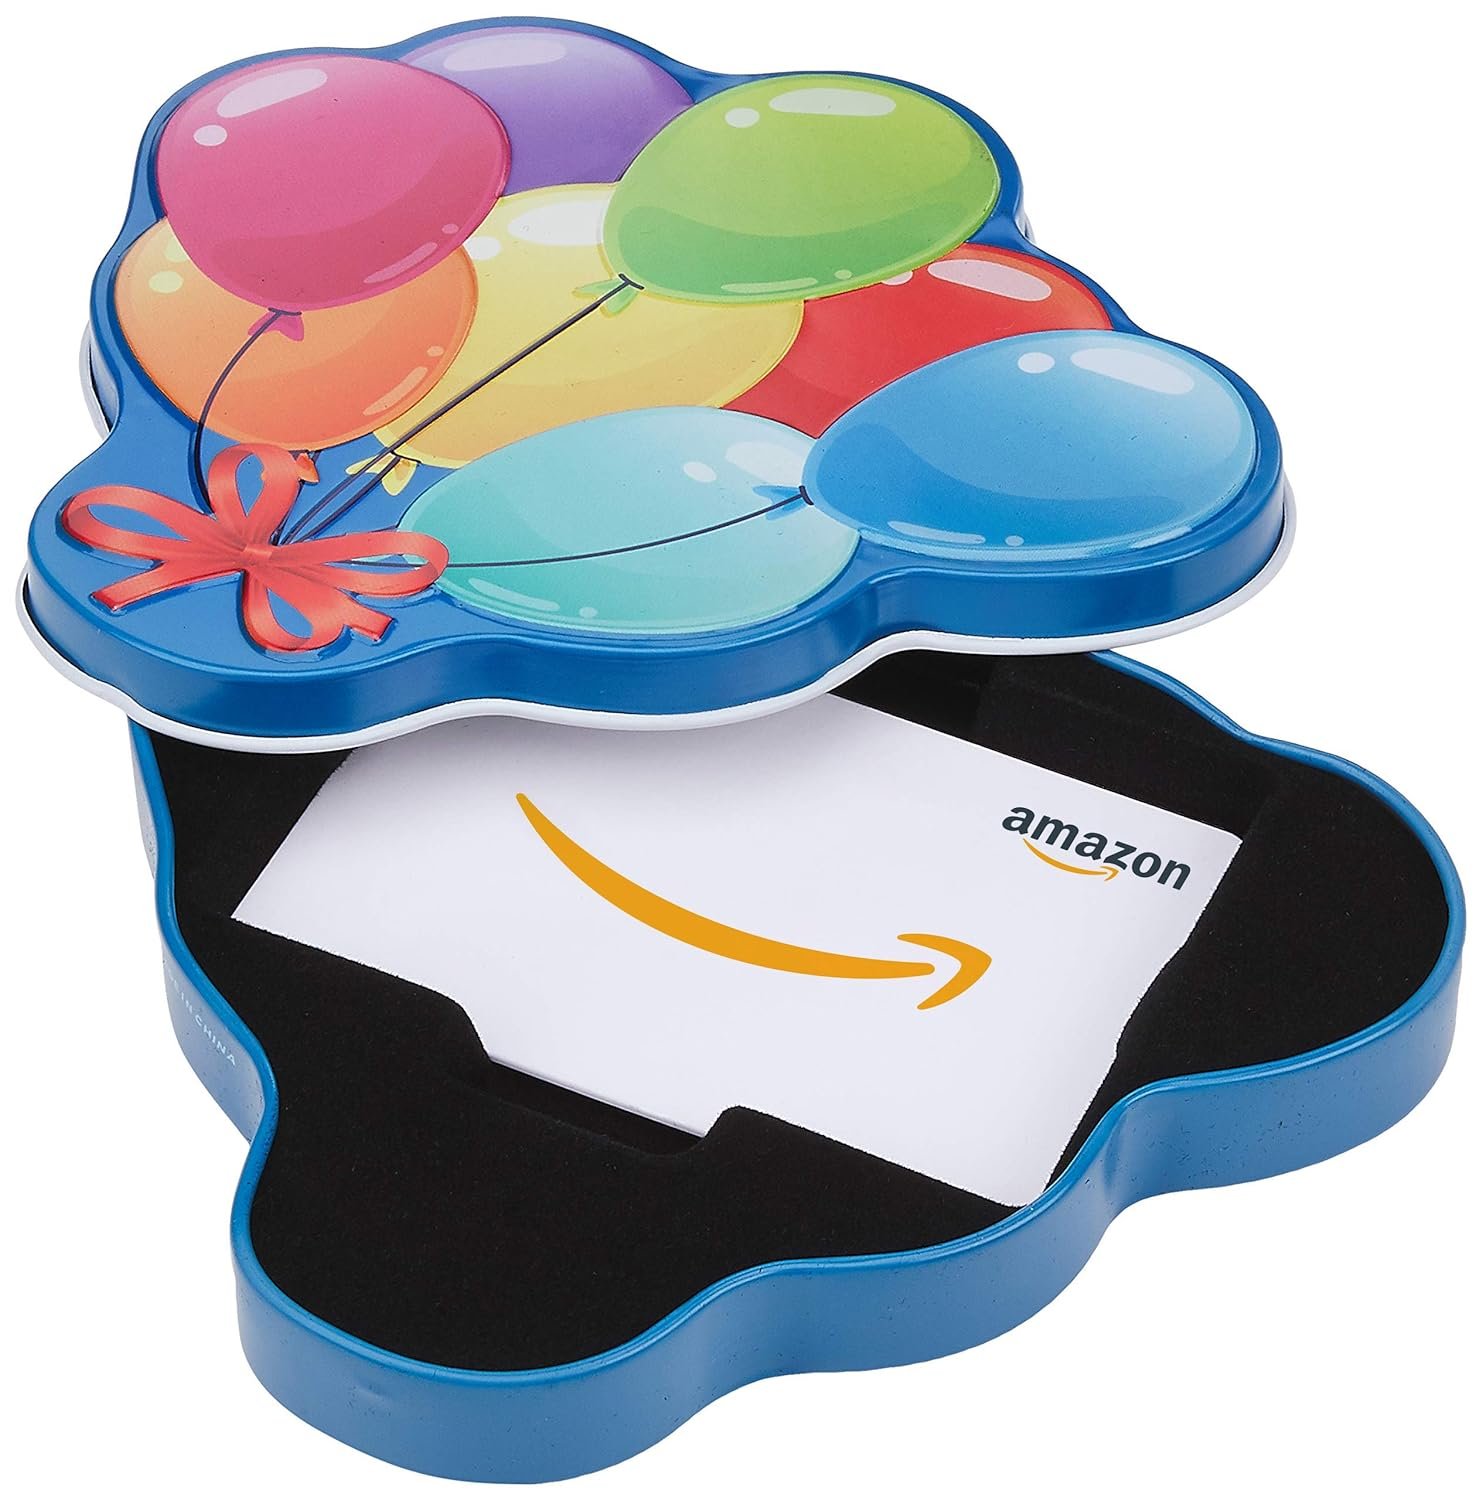 Amazon.com Gift Card in a Birthday Gift Box (Various Designs) Review